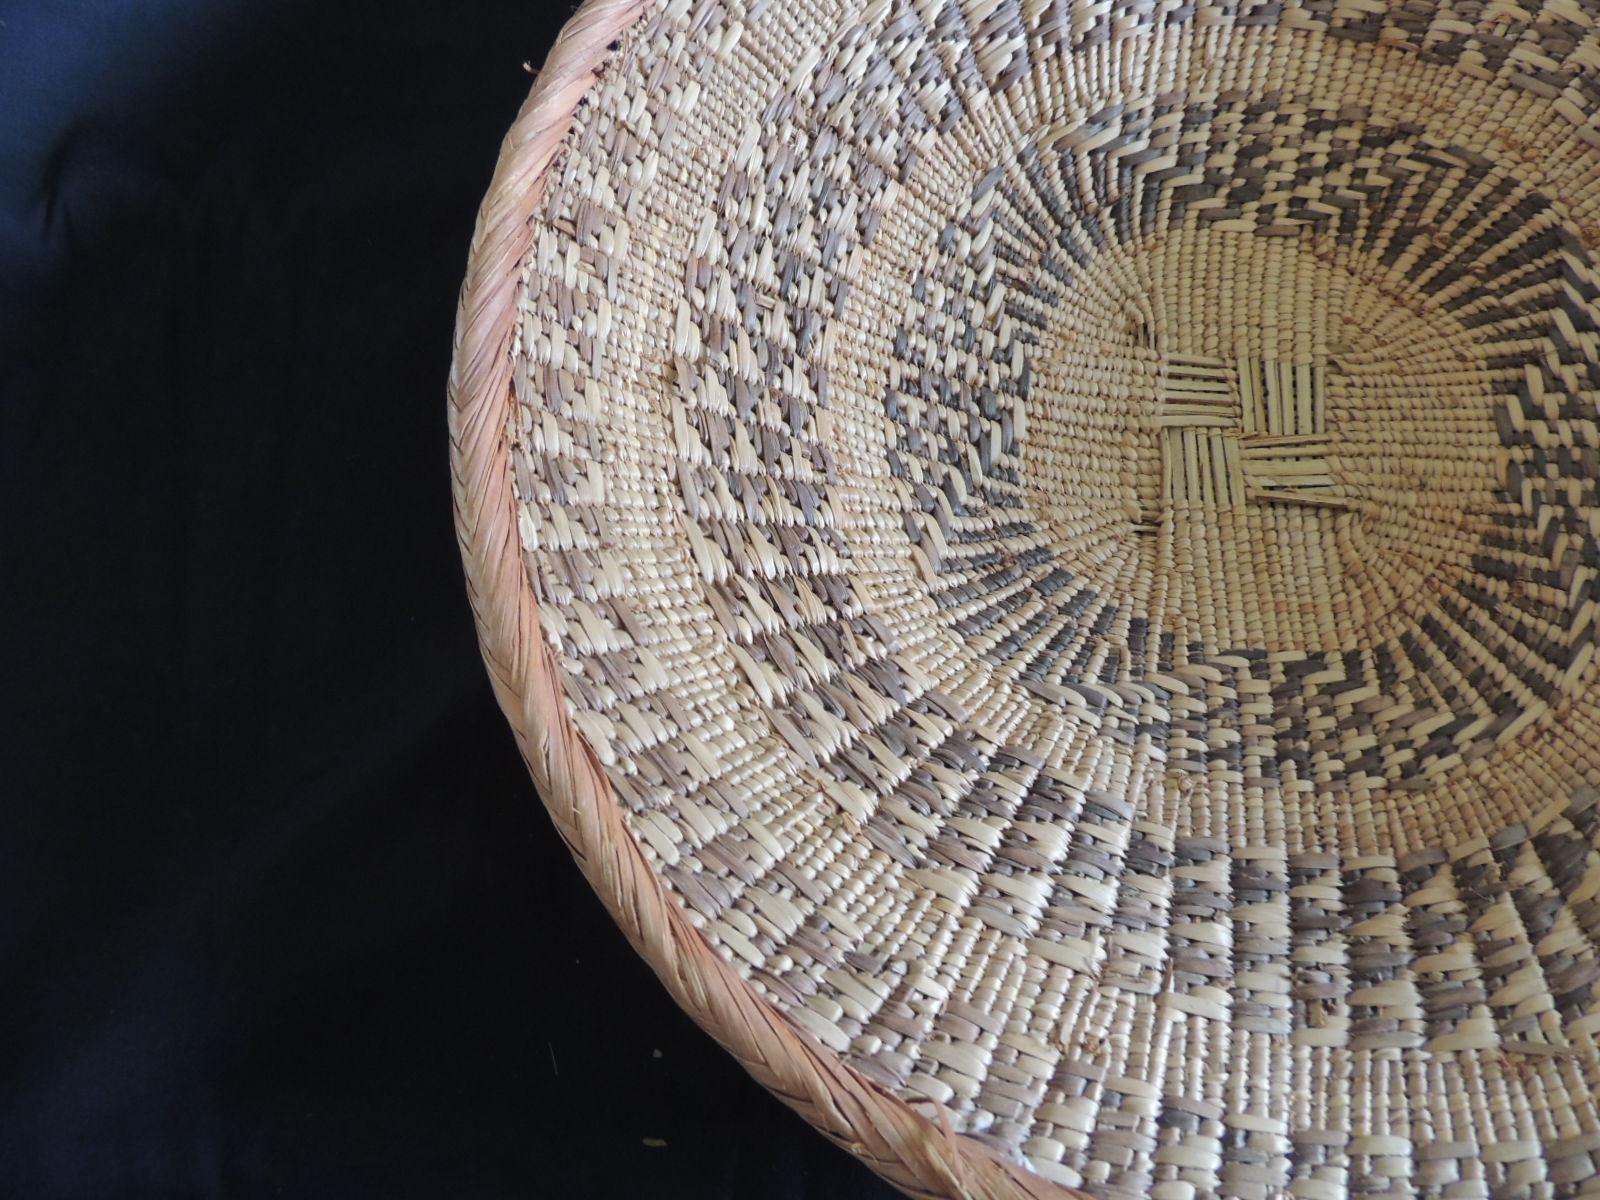 Vintage woven seagrass ethnic round African deep basket.
Artisanal handwoven basket with tribal designs and patterns all around.
(Is not flat is more like a deep bowl shape.)
Size: 15